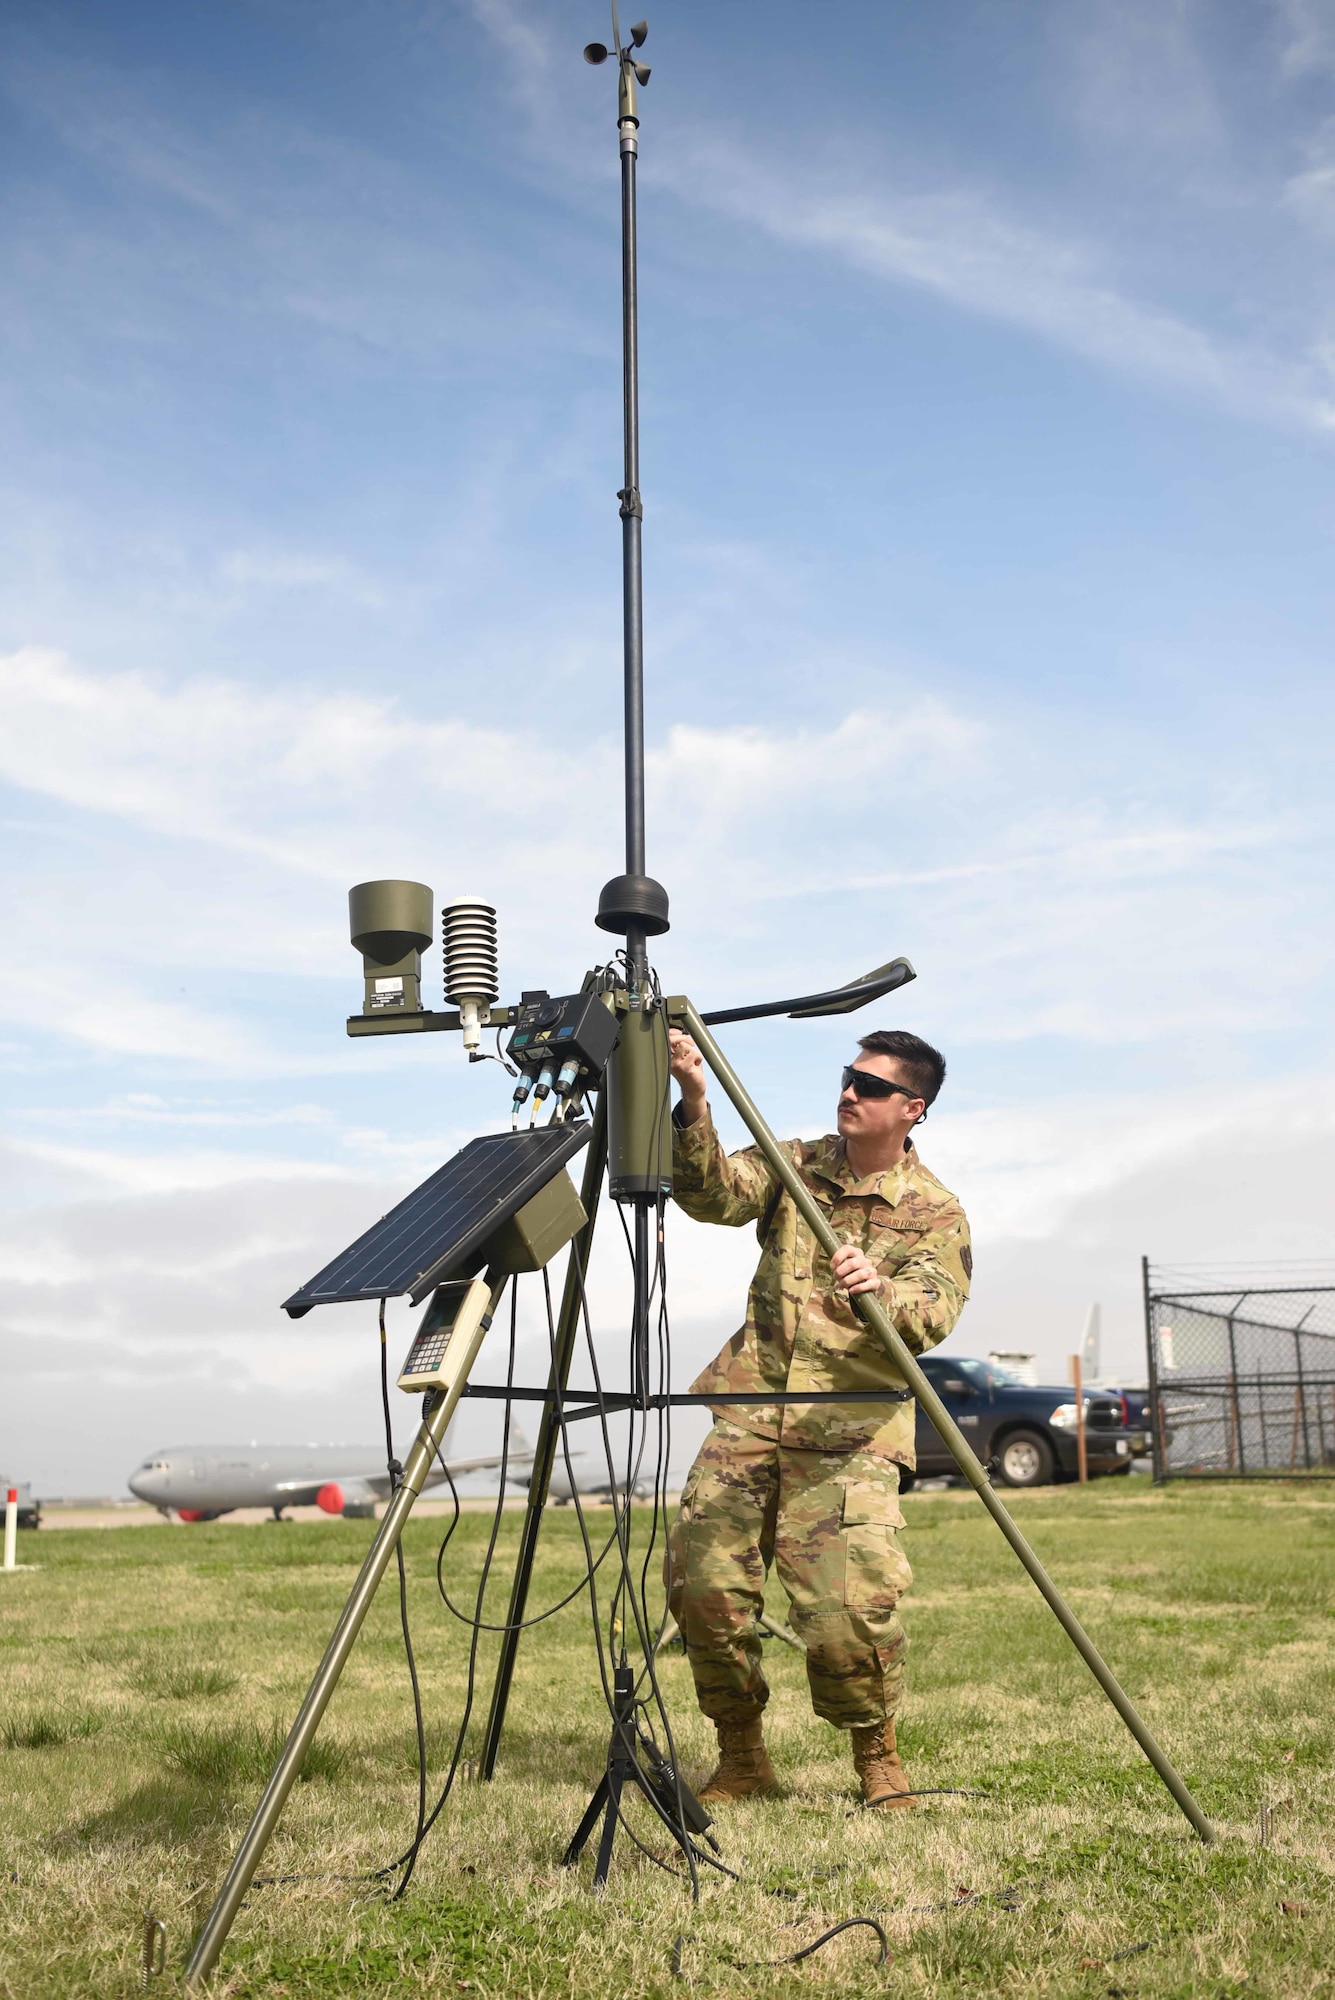 Staff Sgt. Jordan Field, 22nd Operation Support Squadron weather forecaster, checks the tactical meteorological observing system March 26, 2020, at McConnell Air Force Base, Kansas. TMQ-53 is capable of delivering real-time weather updates such as atmospheric pressure, wind speed and direction, cloud ceilings, and lighting strike information in 5-second intervals. (U.S. Air Force photo by Senior Airman Alexi Bosarge)